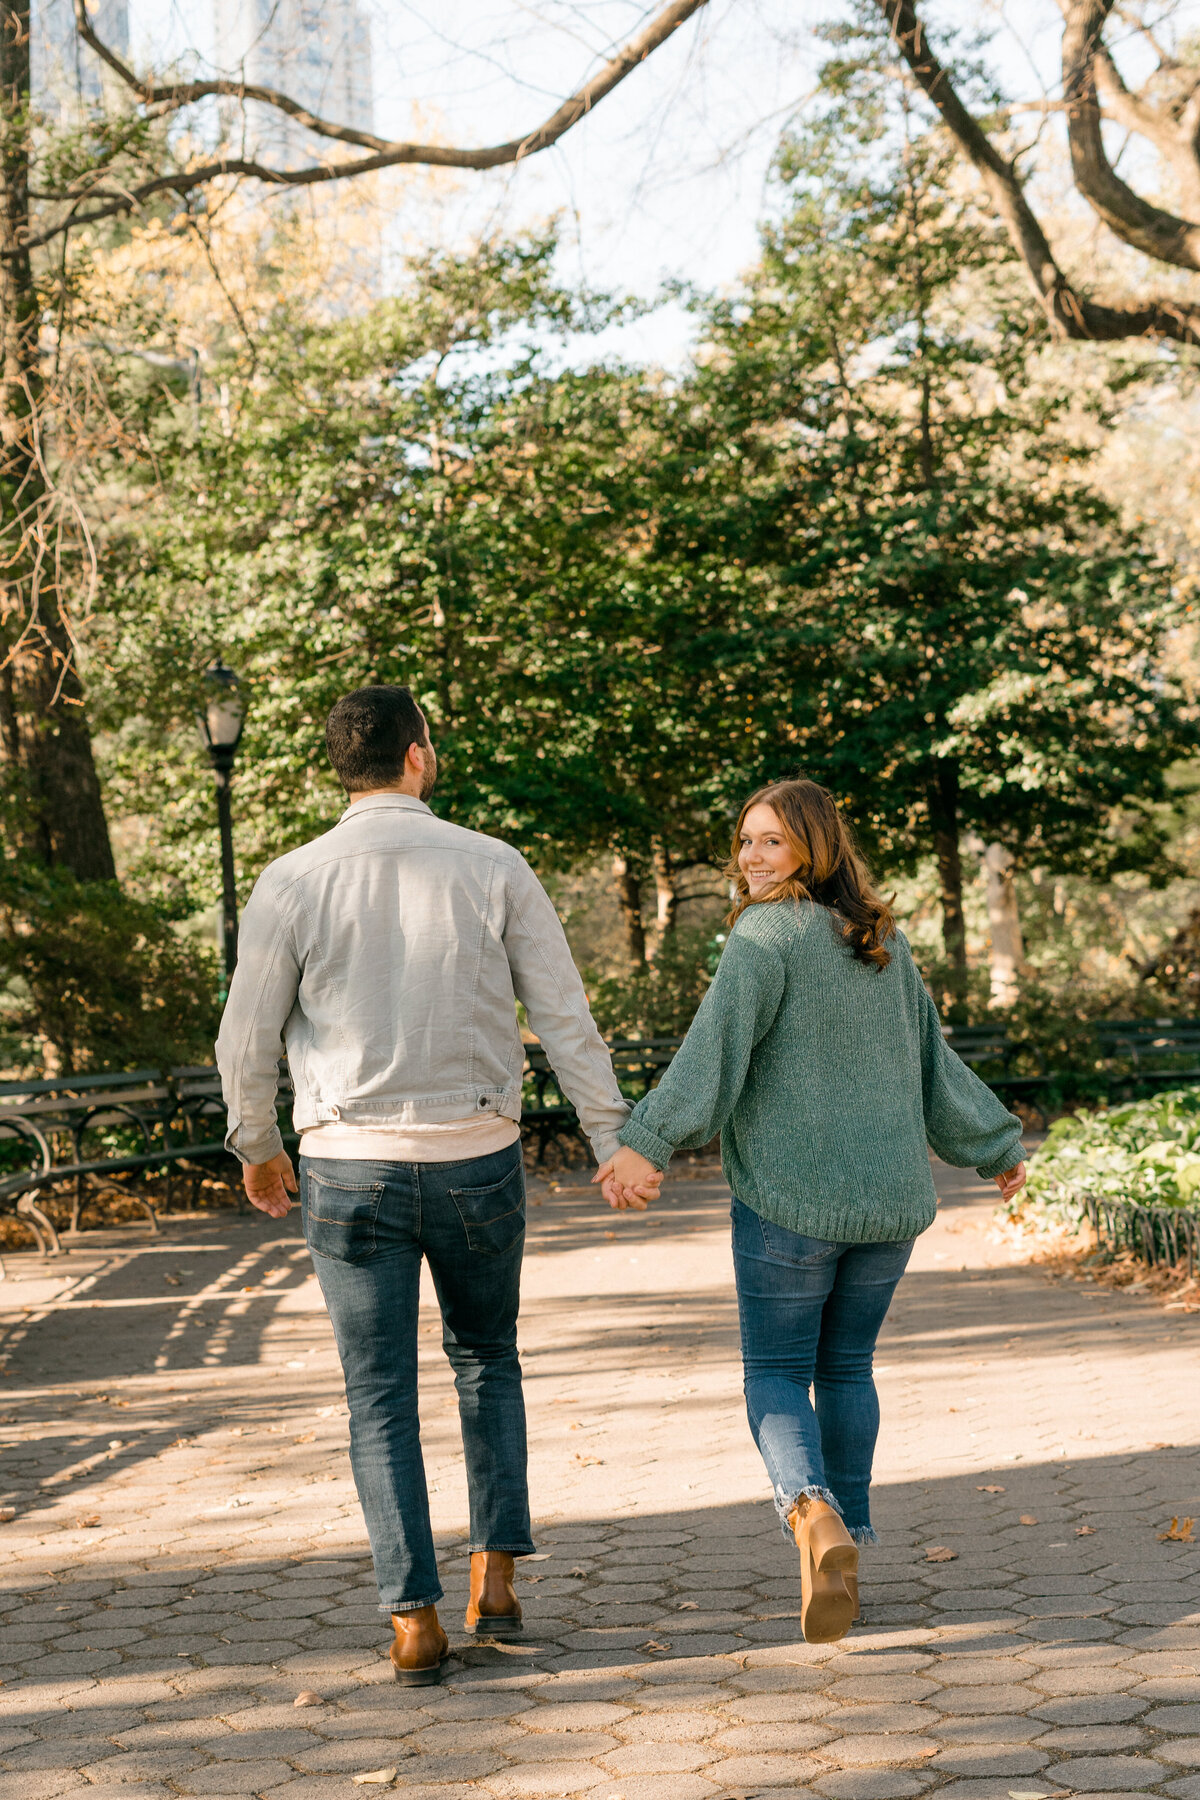 man and woman holding hands in park while walking away together and woman is looking back  smiling over her shoulder